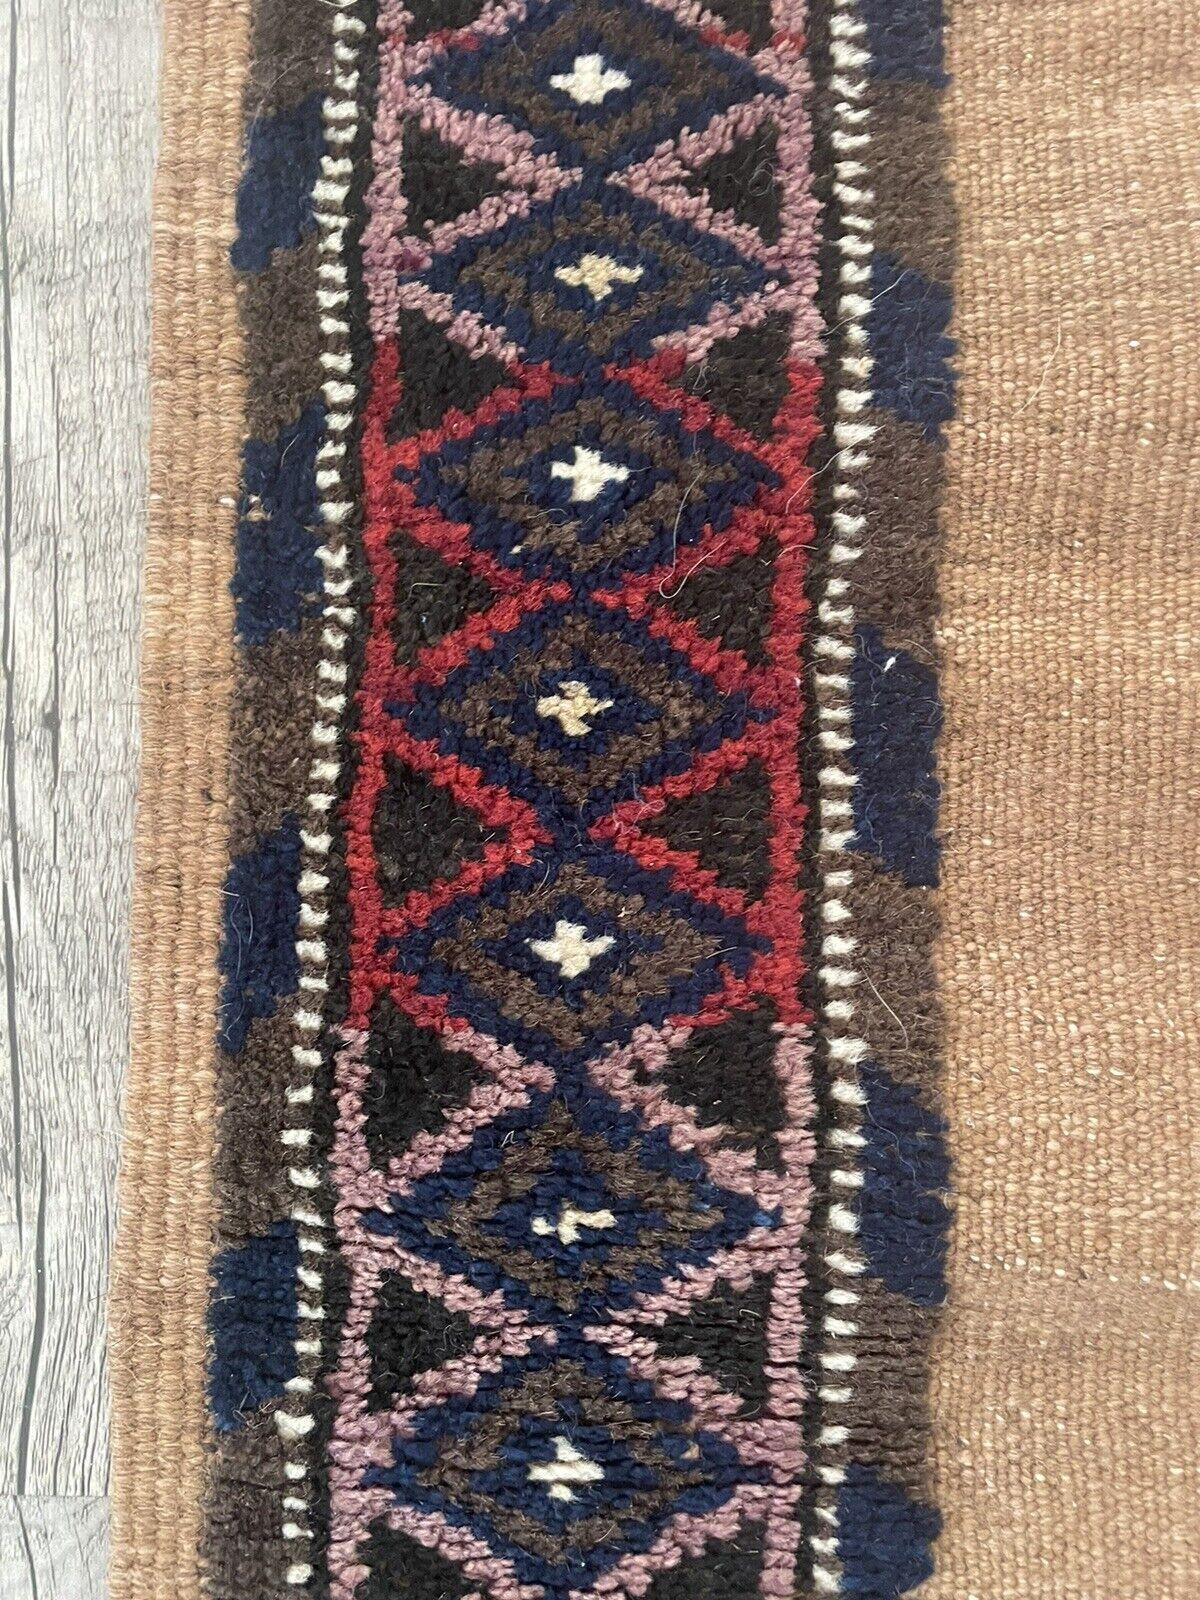 Wool Handmade Antique Afghan Baluch Collectible Rug 2.3' x 5', 1920s - 1N12 For Sale